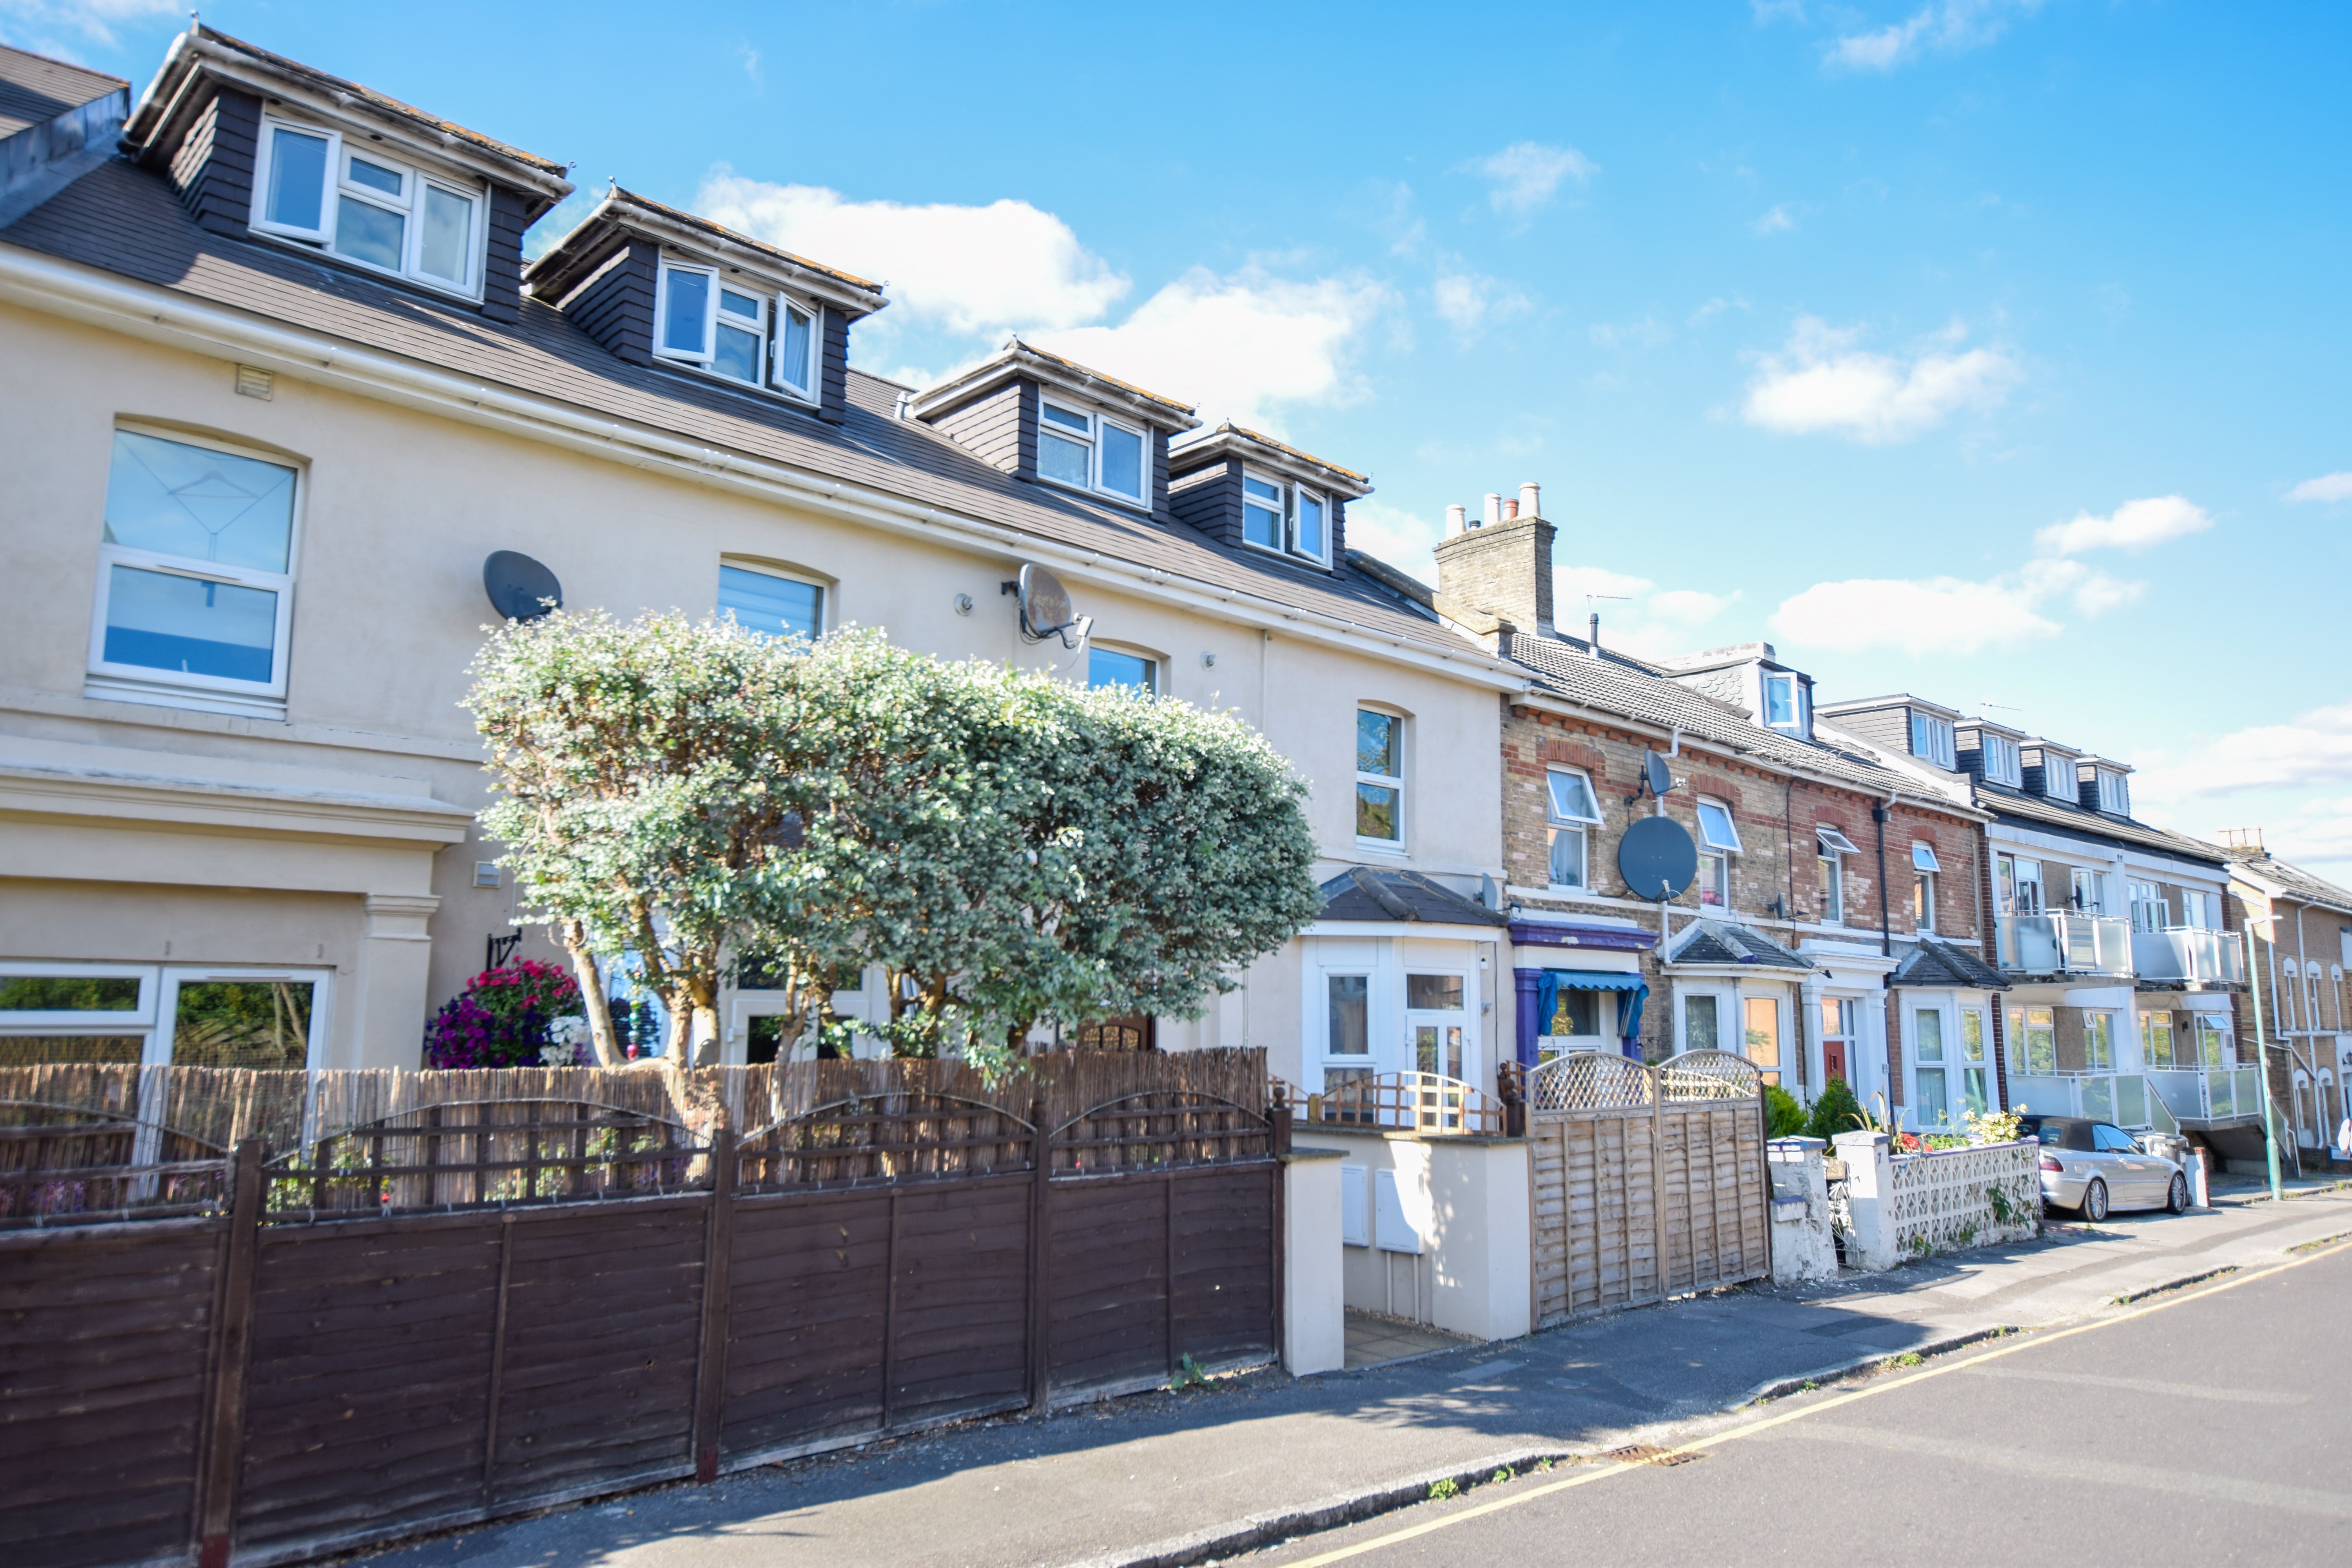 Christopher Shaw Residential is delighted to bring to the market this attractive 2 double bedroom ground floor flat with private outdoors space, parking and some other attractive features...